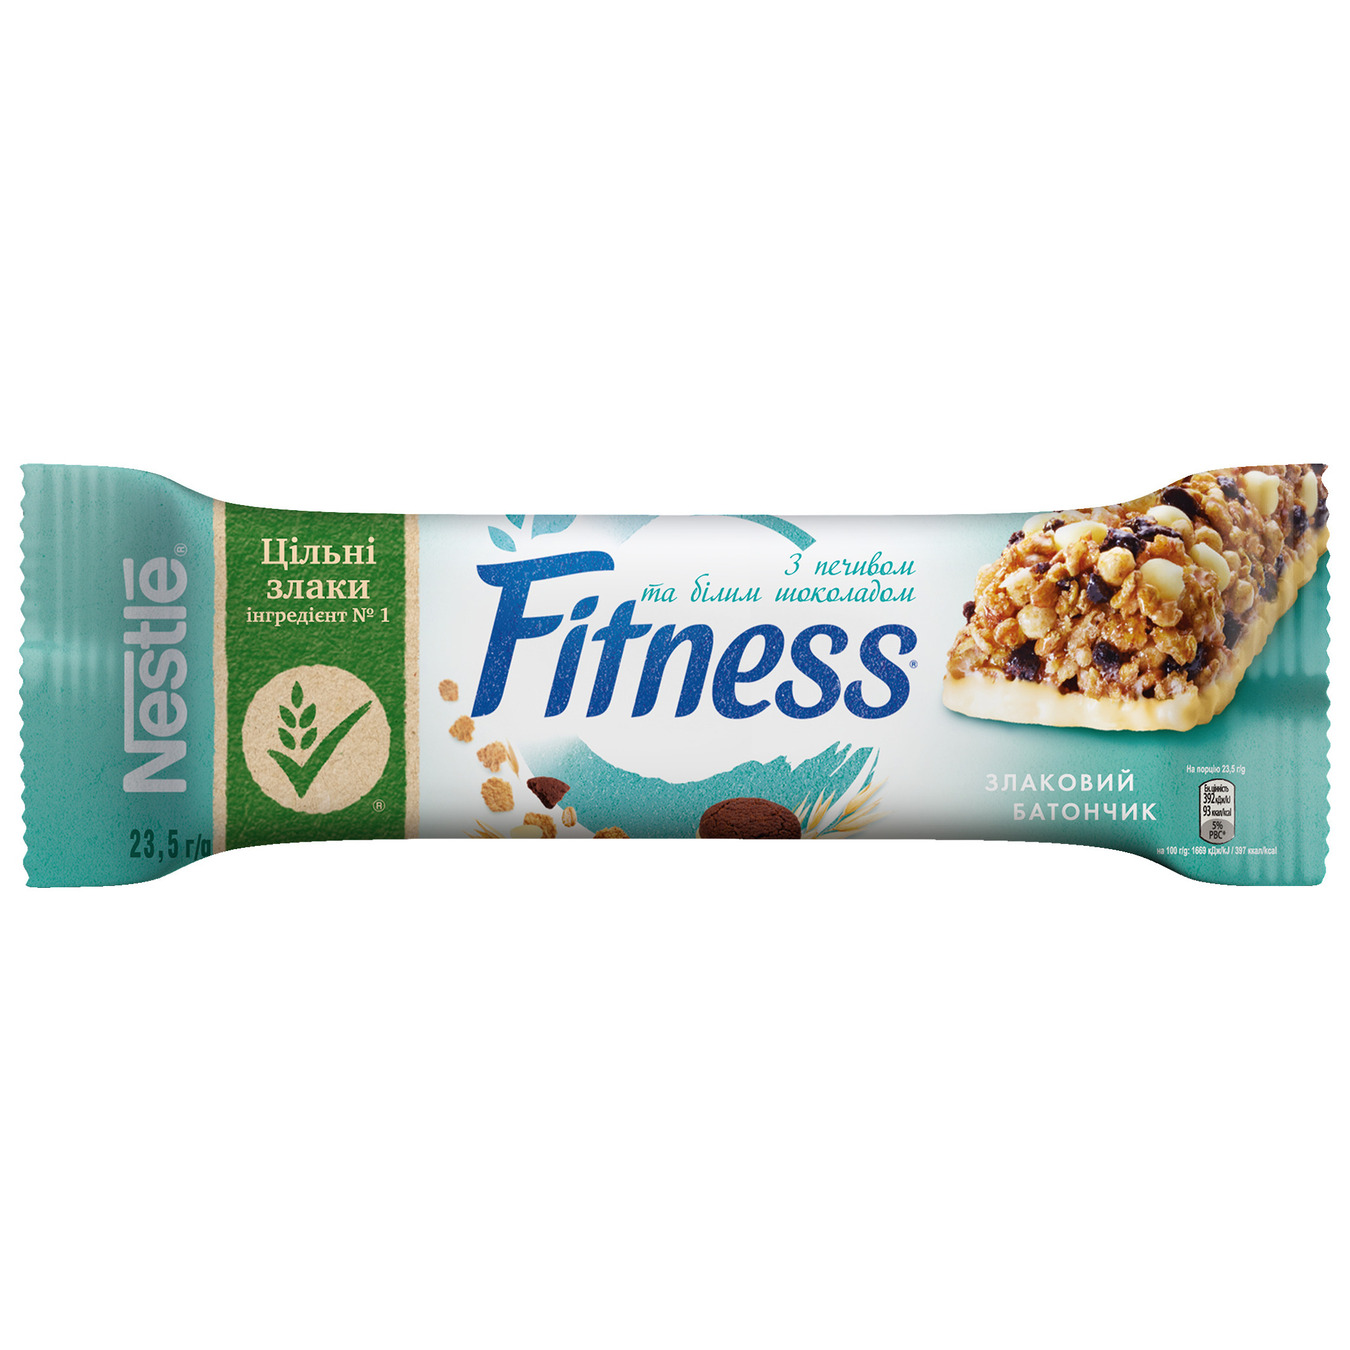 Cereal bar Fitness with cookies and white chocolate 23.5g